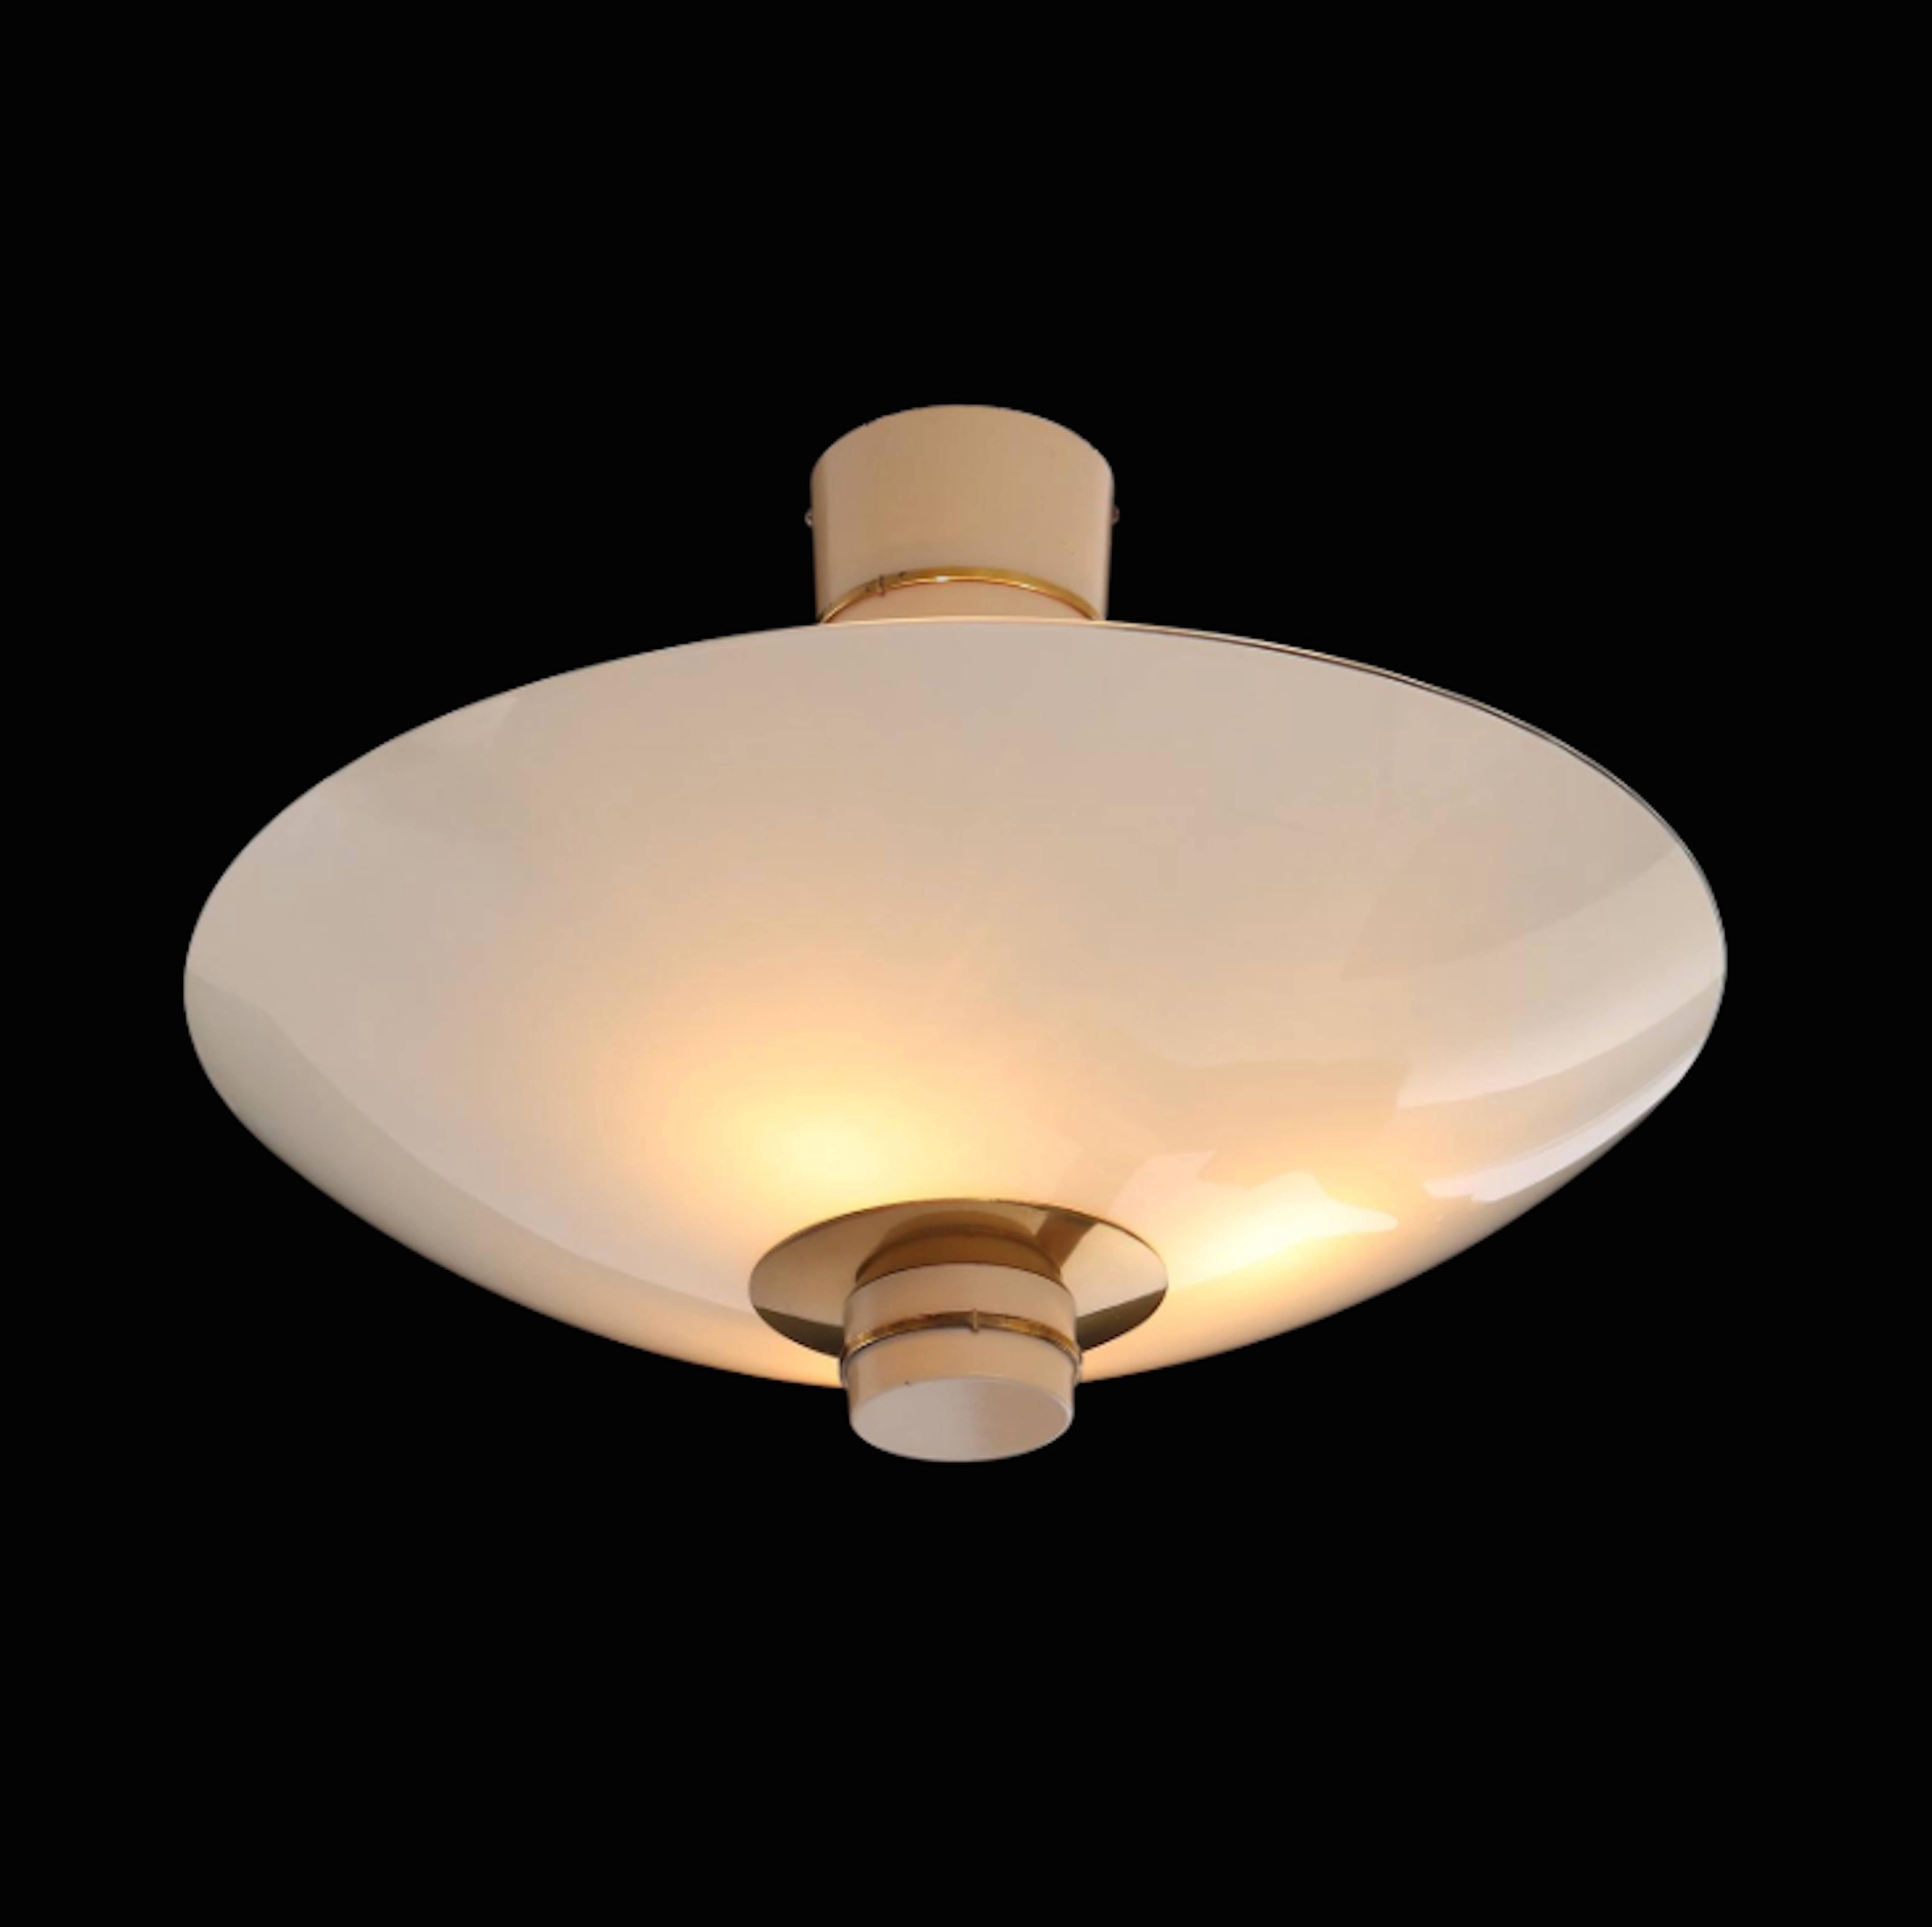 Scandinavian Modern A Paavo Tynell  Ceiling Lamps Model 9055 for Taito Oy, 1940